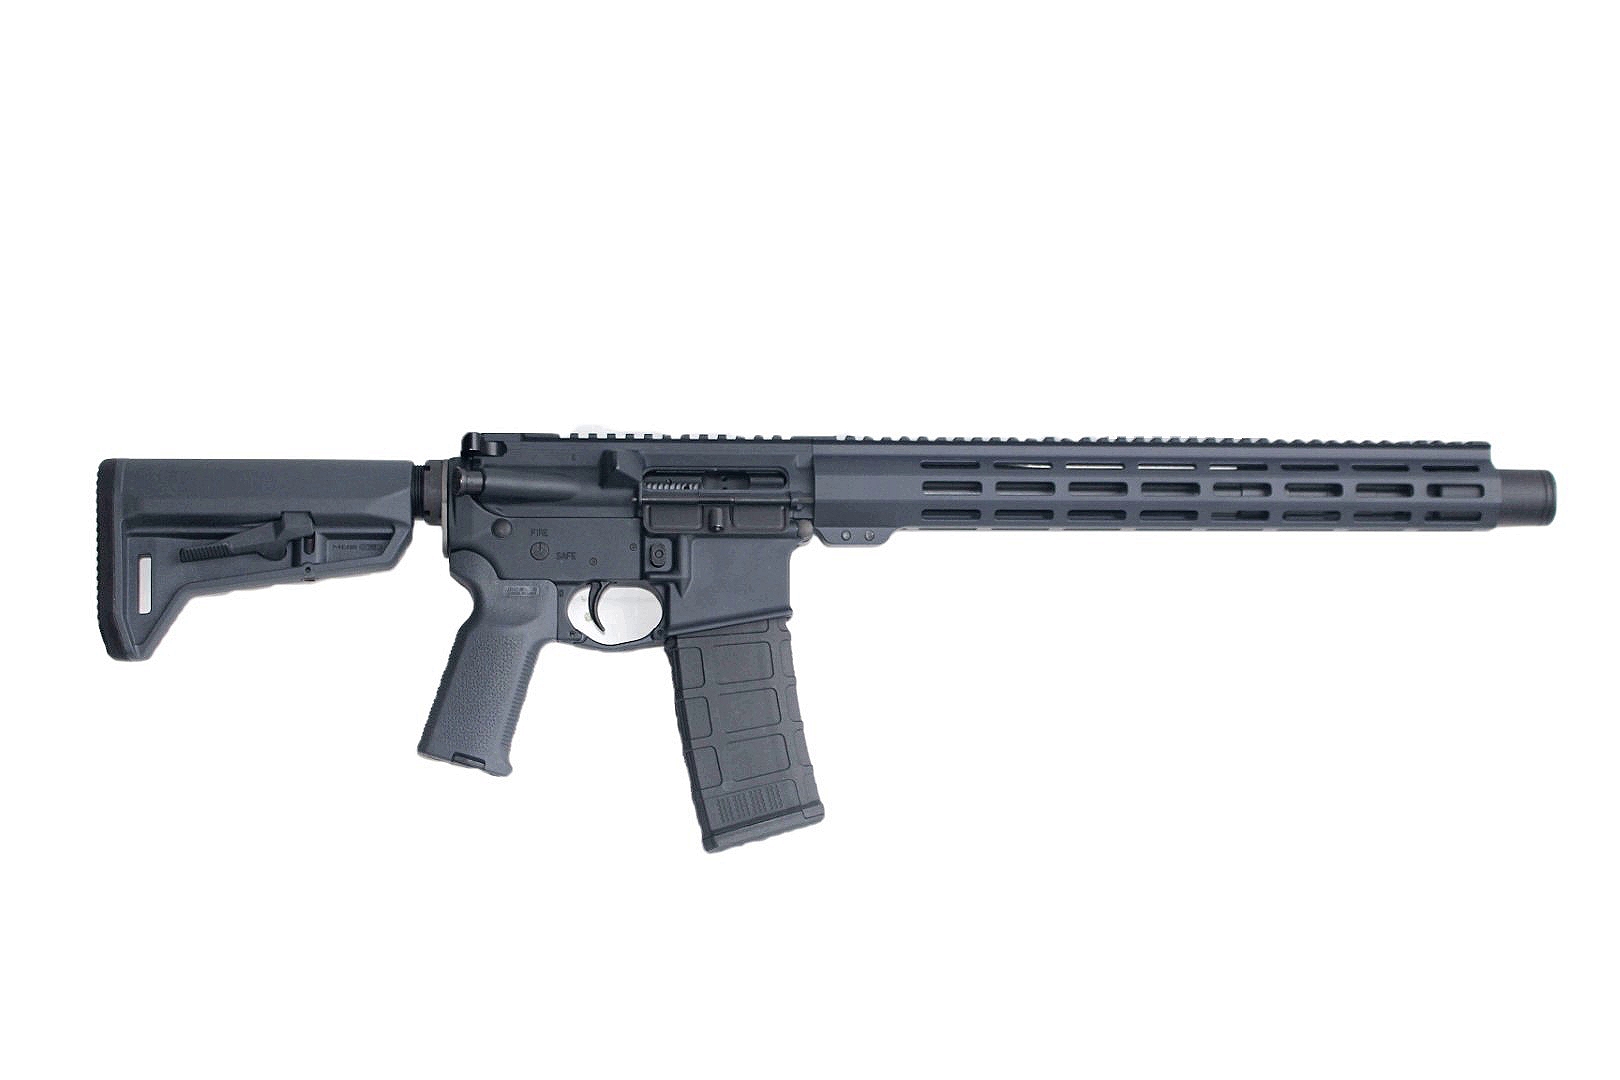 P2A PATRIOT 13.7" 5.56 NATO 1/7 Mid Length Melonite M-LOK Rifle with Flash Can - GRAY - Pinned & Welded